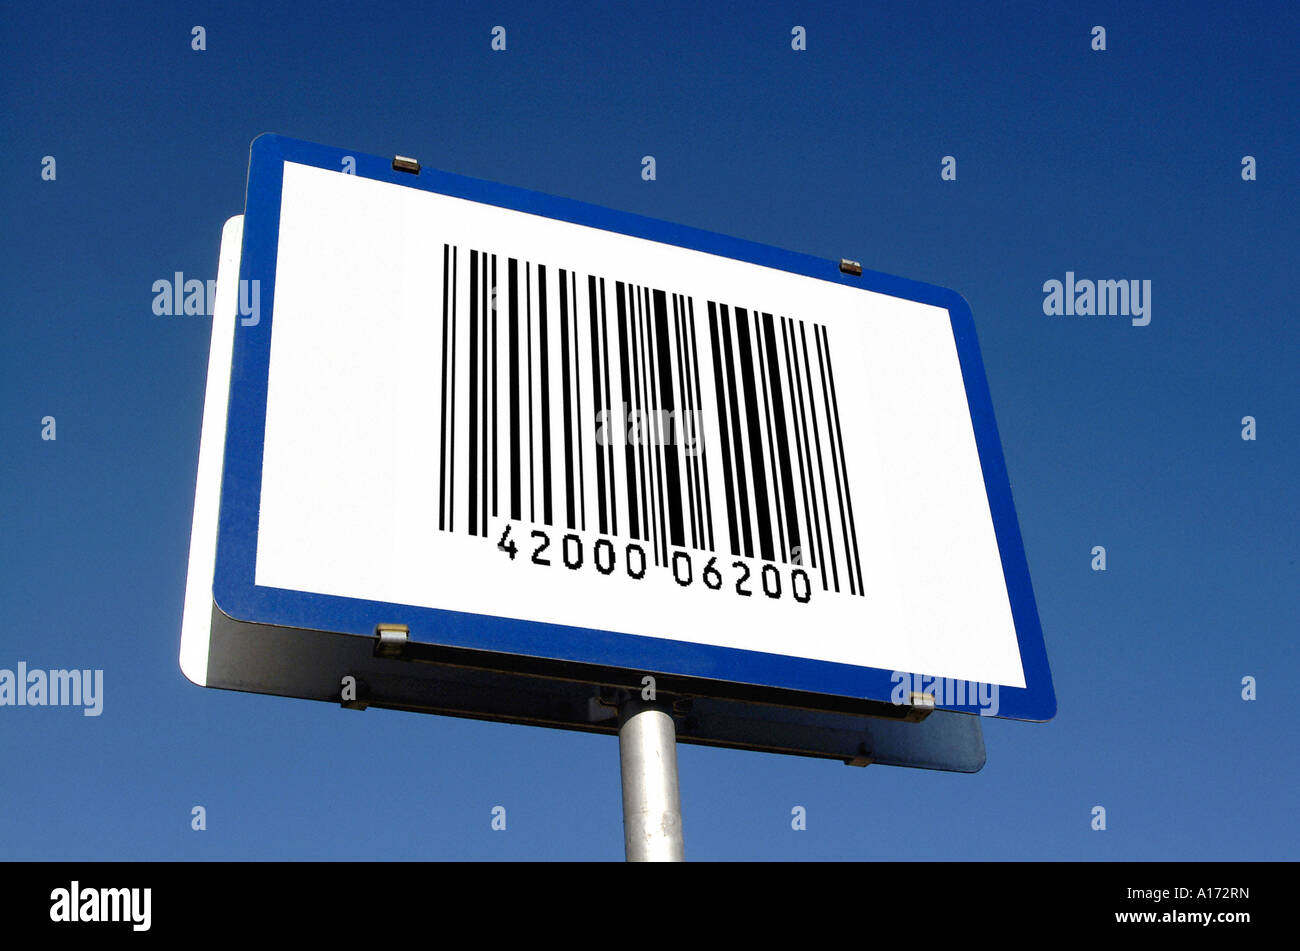 Austrian place-name sign with bar code Stock Photo